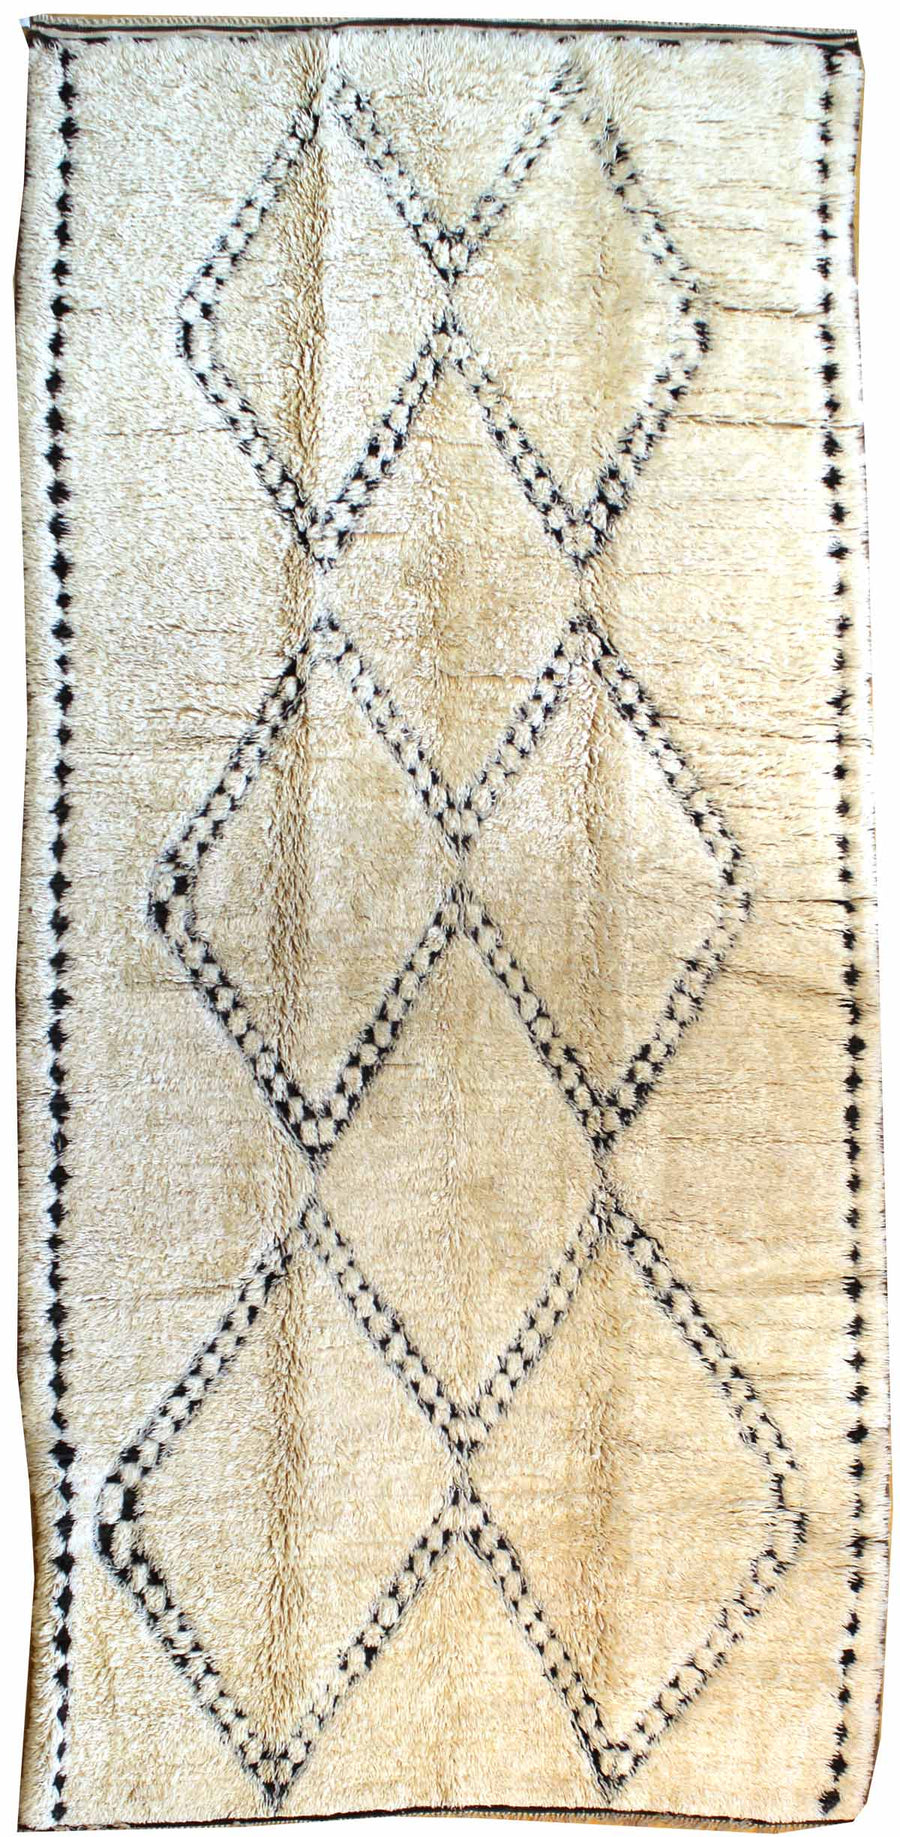 BENI OURAINE HANDKNOTTED RUG, J38928